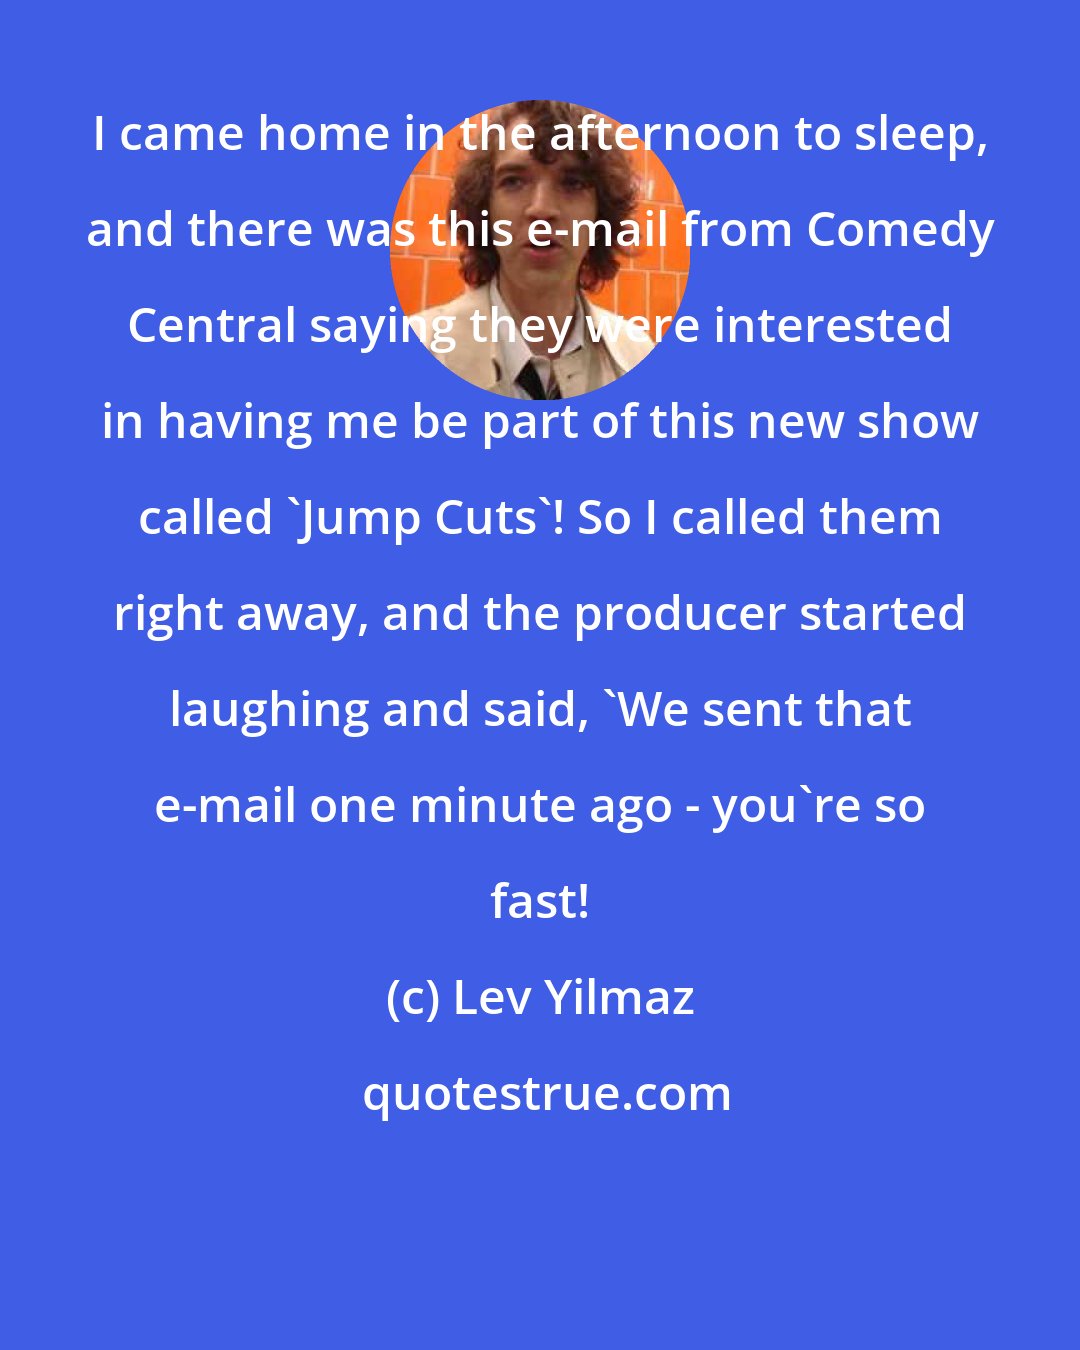 Lev Yilmaz: I came home in the afternoon to sleep, and there was this e-mail from Comedy Central saying they were interested in having me be part of this new show called 'Jump Cuts'! So I called them right away, and the producer started laughing and said, 'We sent that e-mail one minute ago - you're so fast!